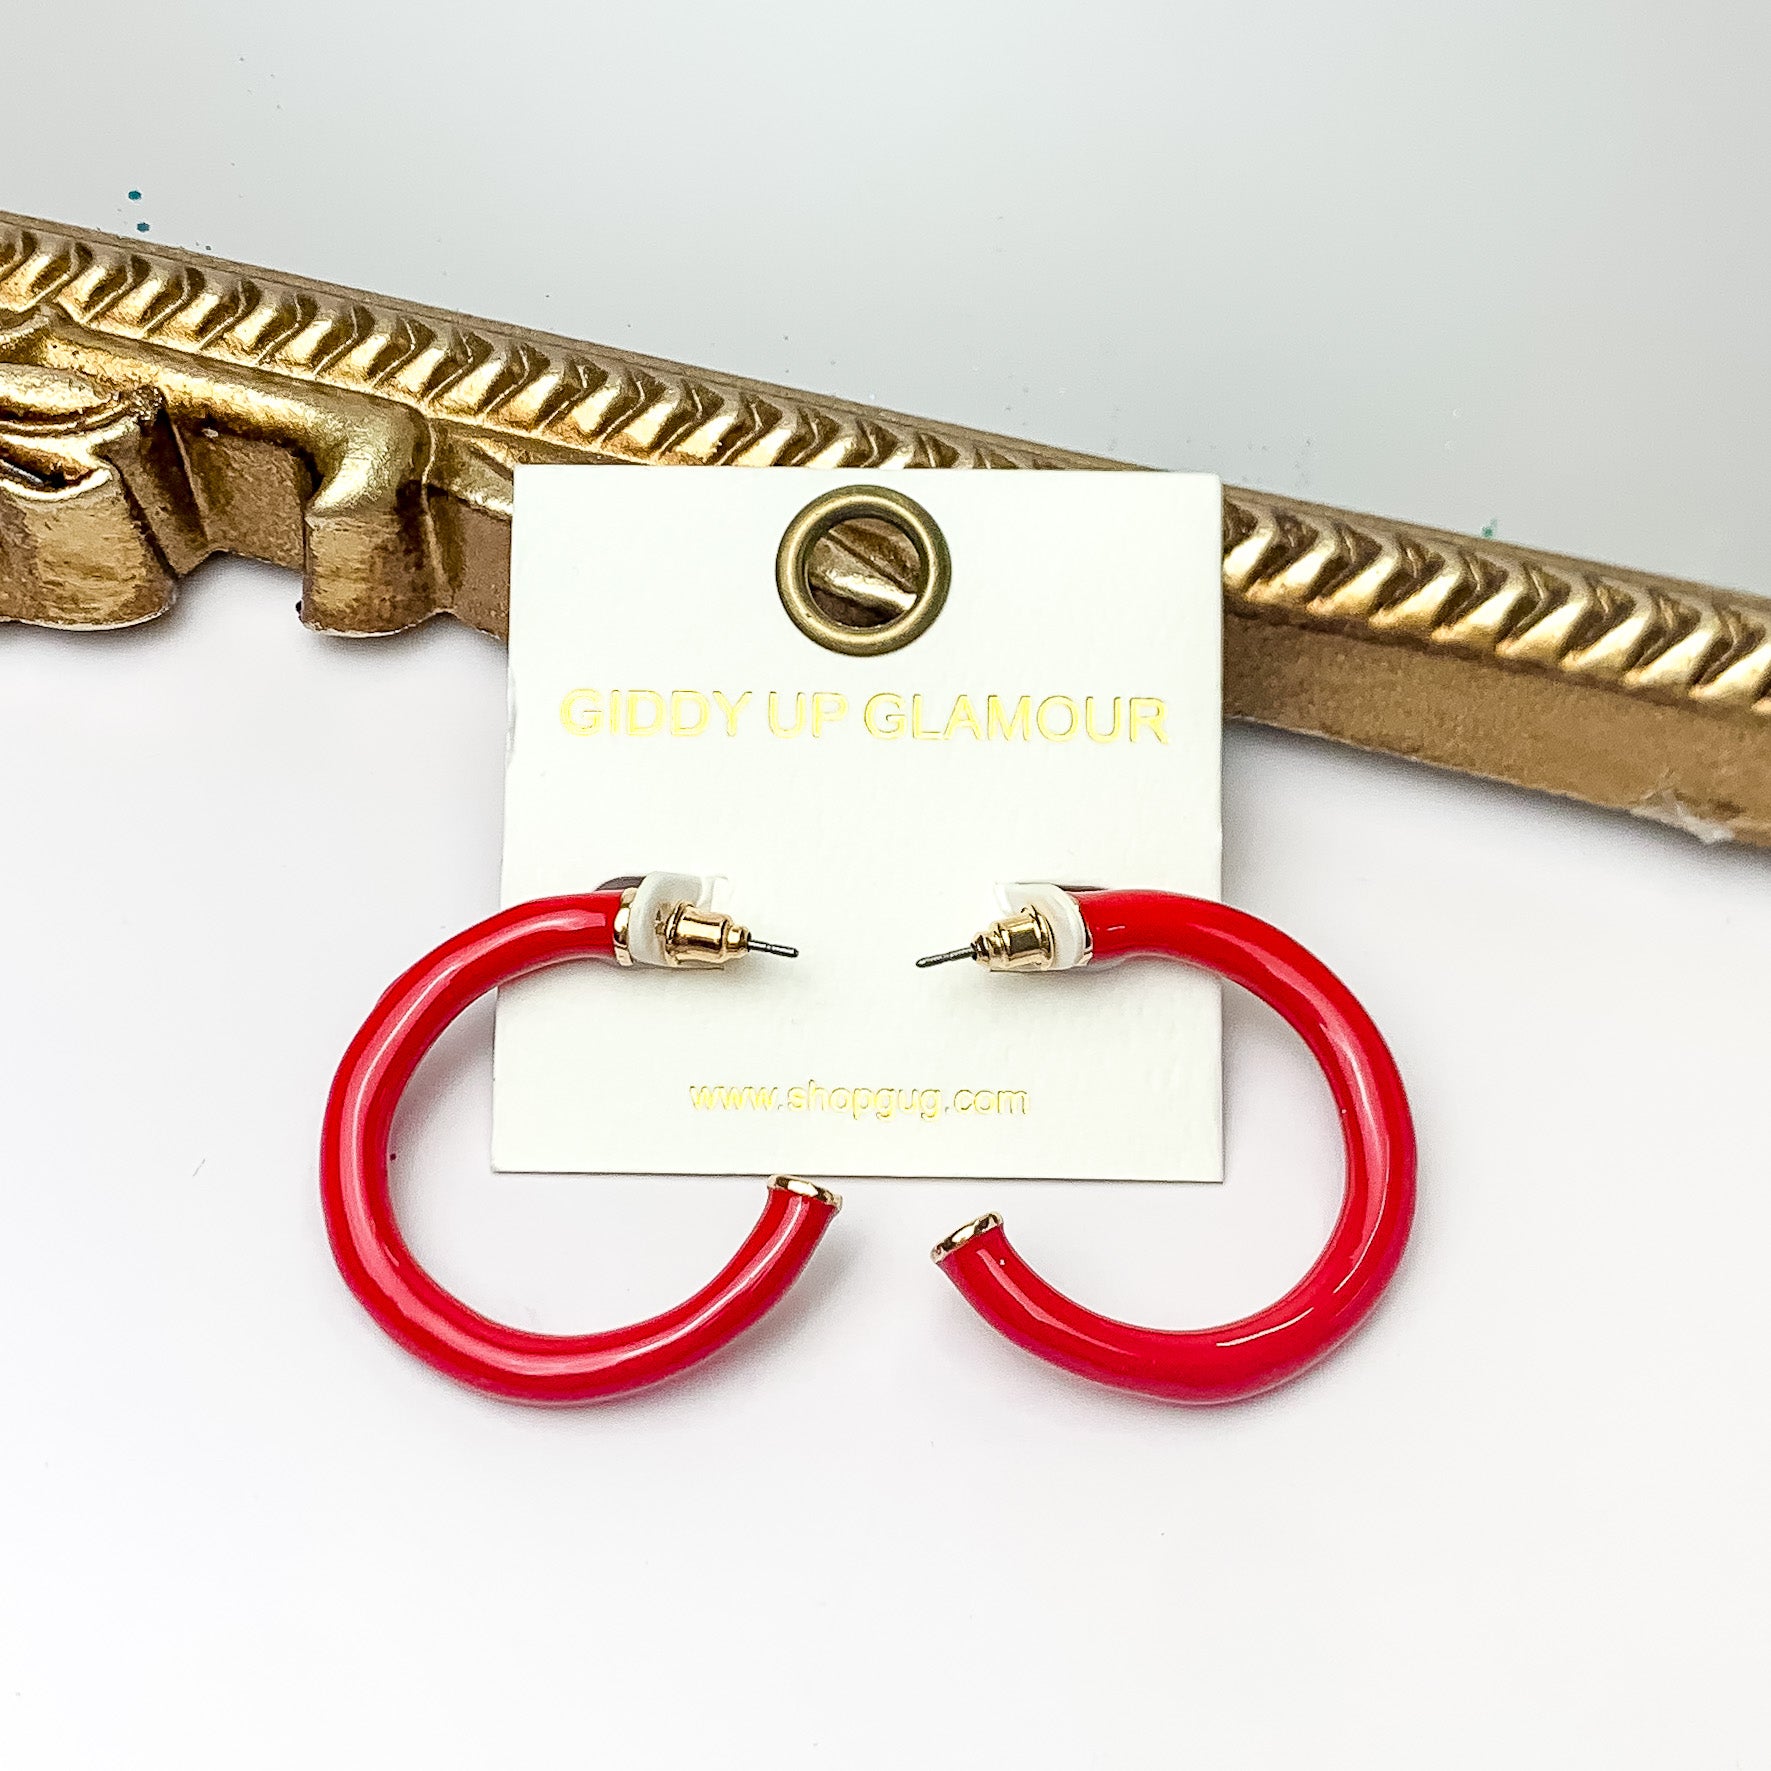 Plan For Cabo Small Hoop Earrings in Red. Pictured on a white background with a gold frame behind the earrings.